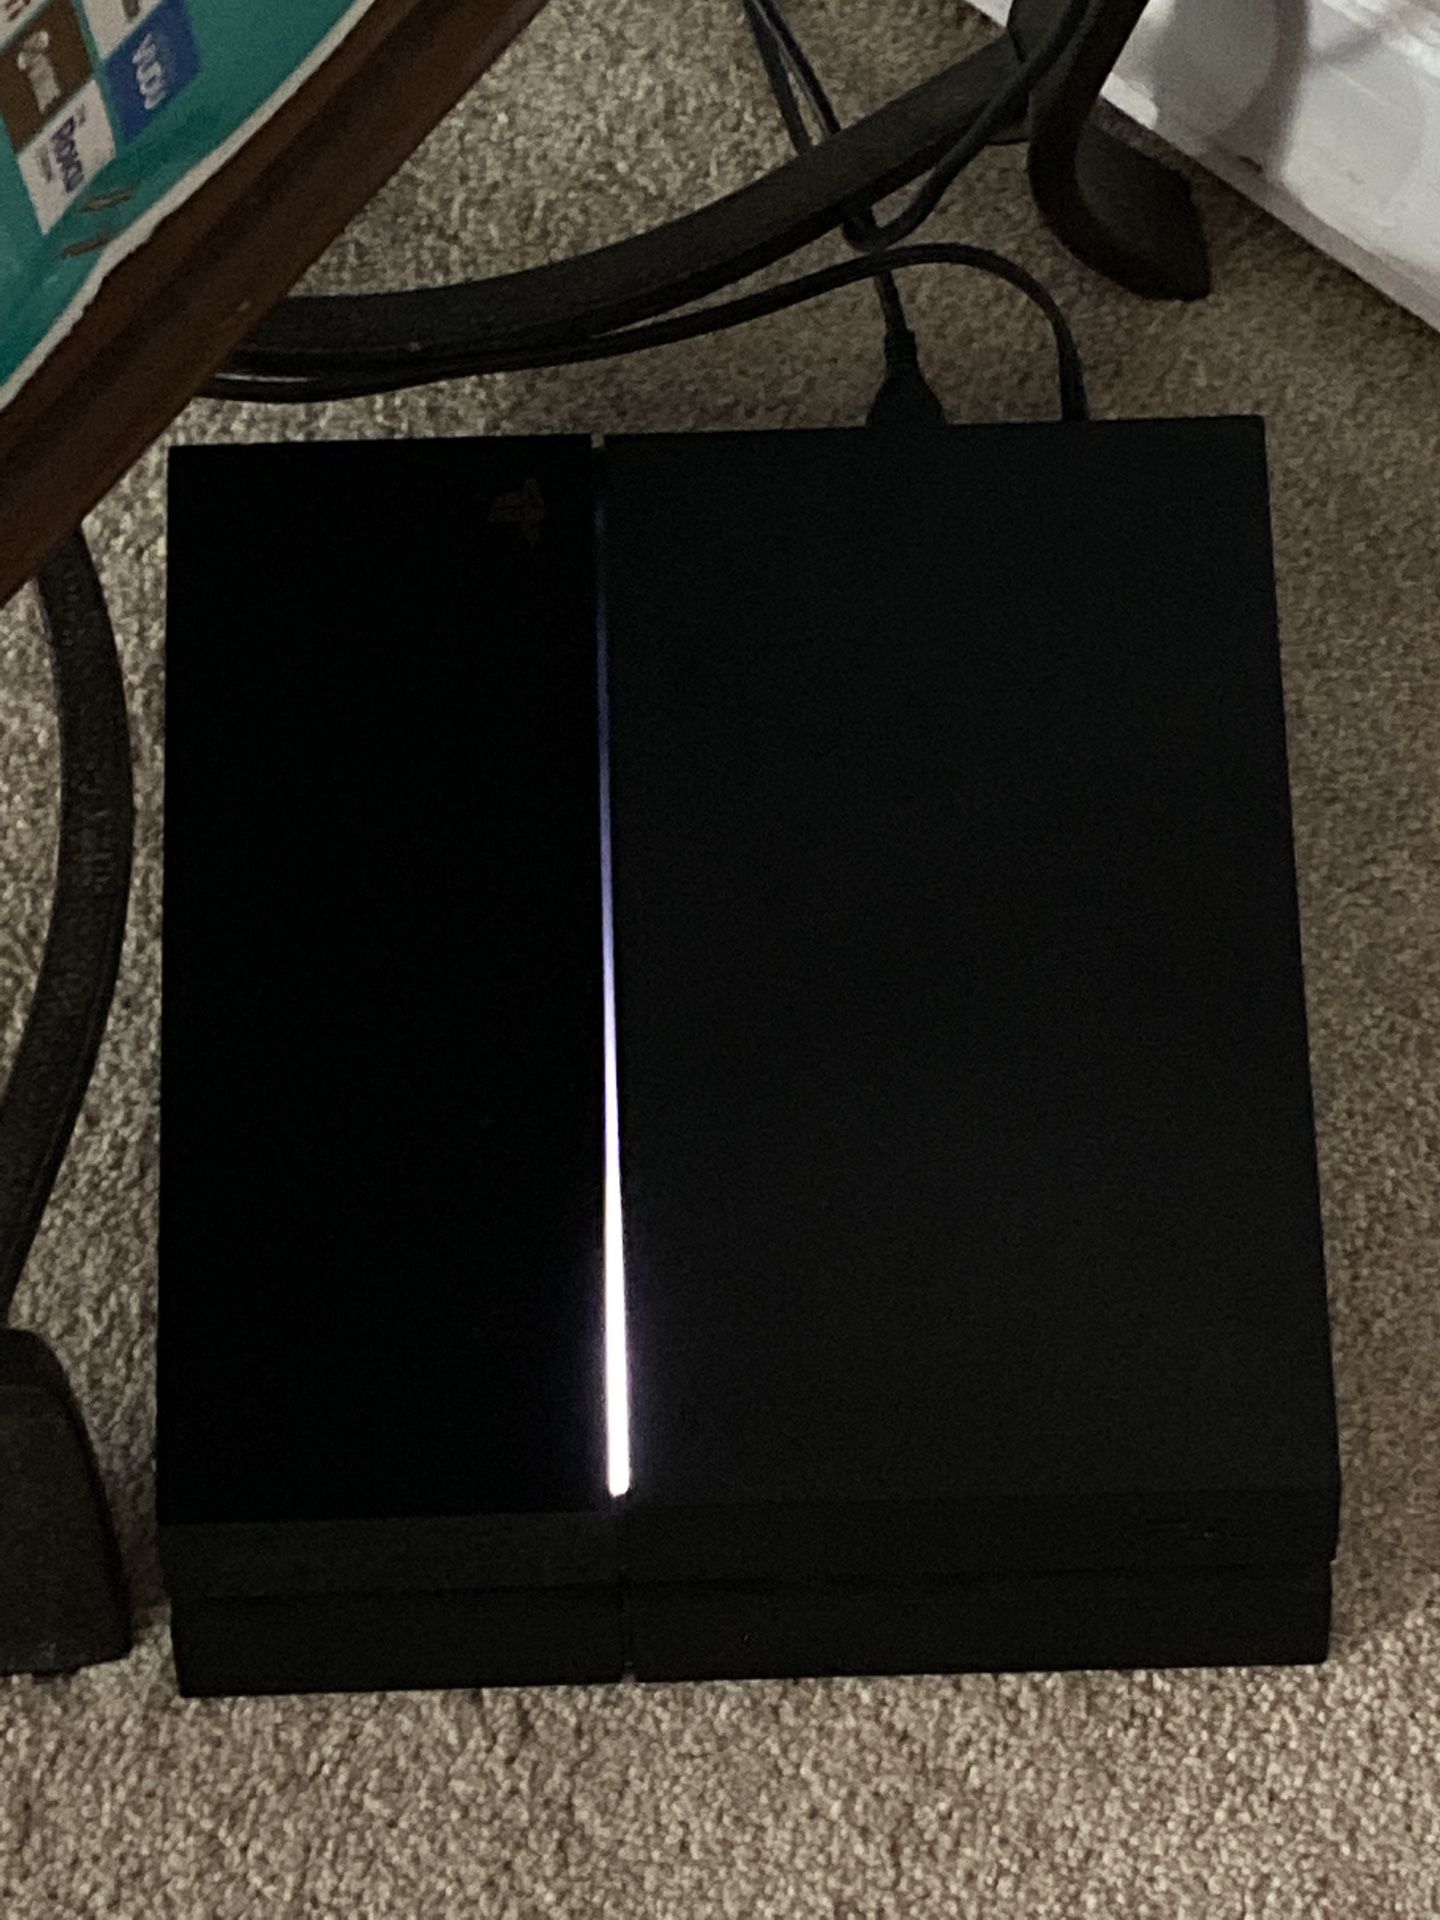 Ps4 500gb great condition